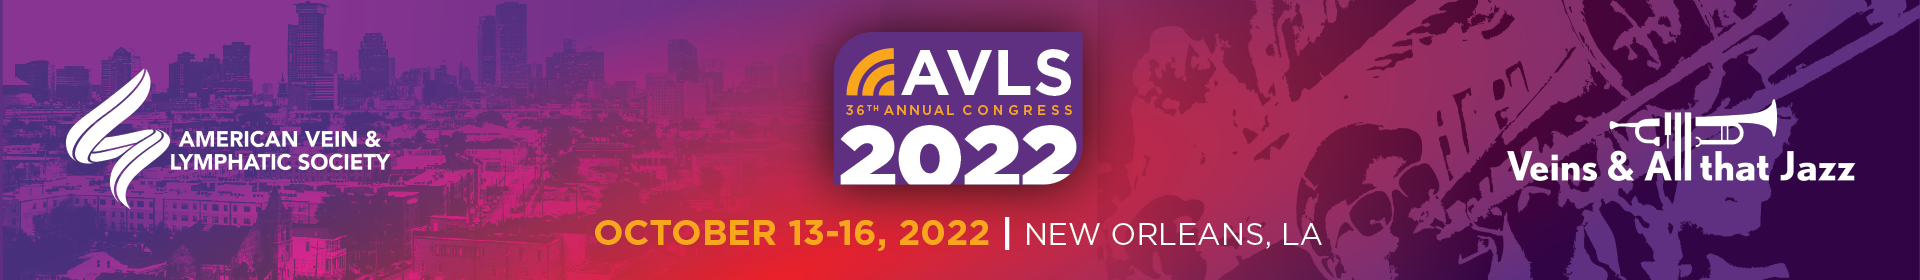 AVLS 2022 Annual Congress Event Banner